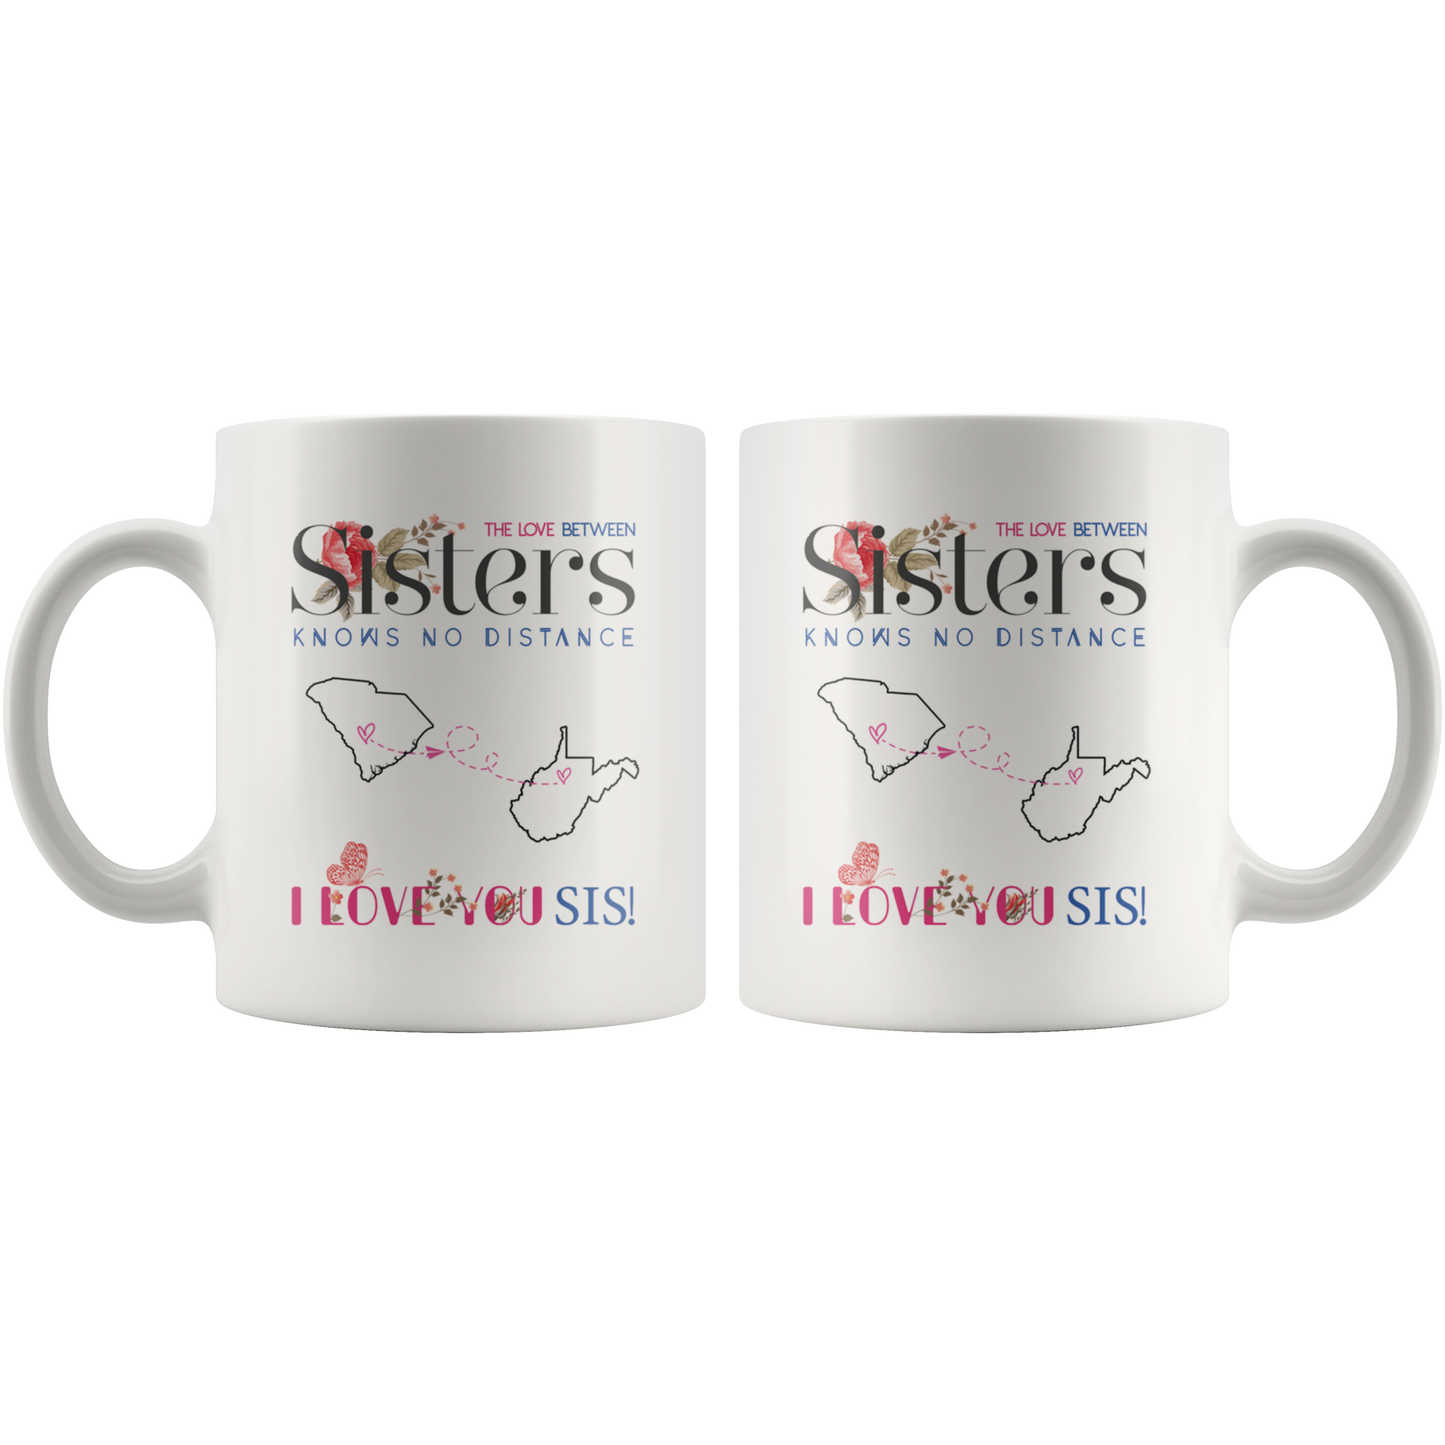 M-20521020-sp-19421 - Long Distance Relationship Gift - The Love Between Sisters K